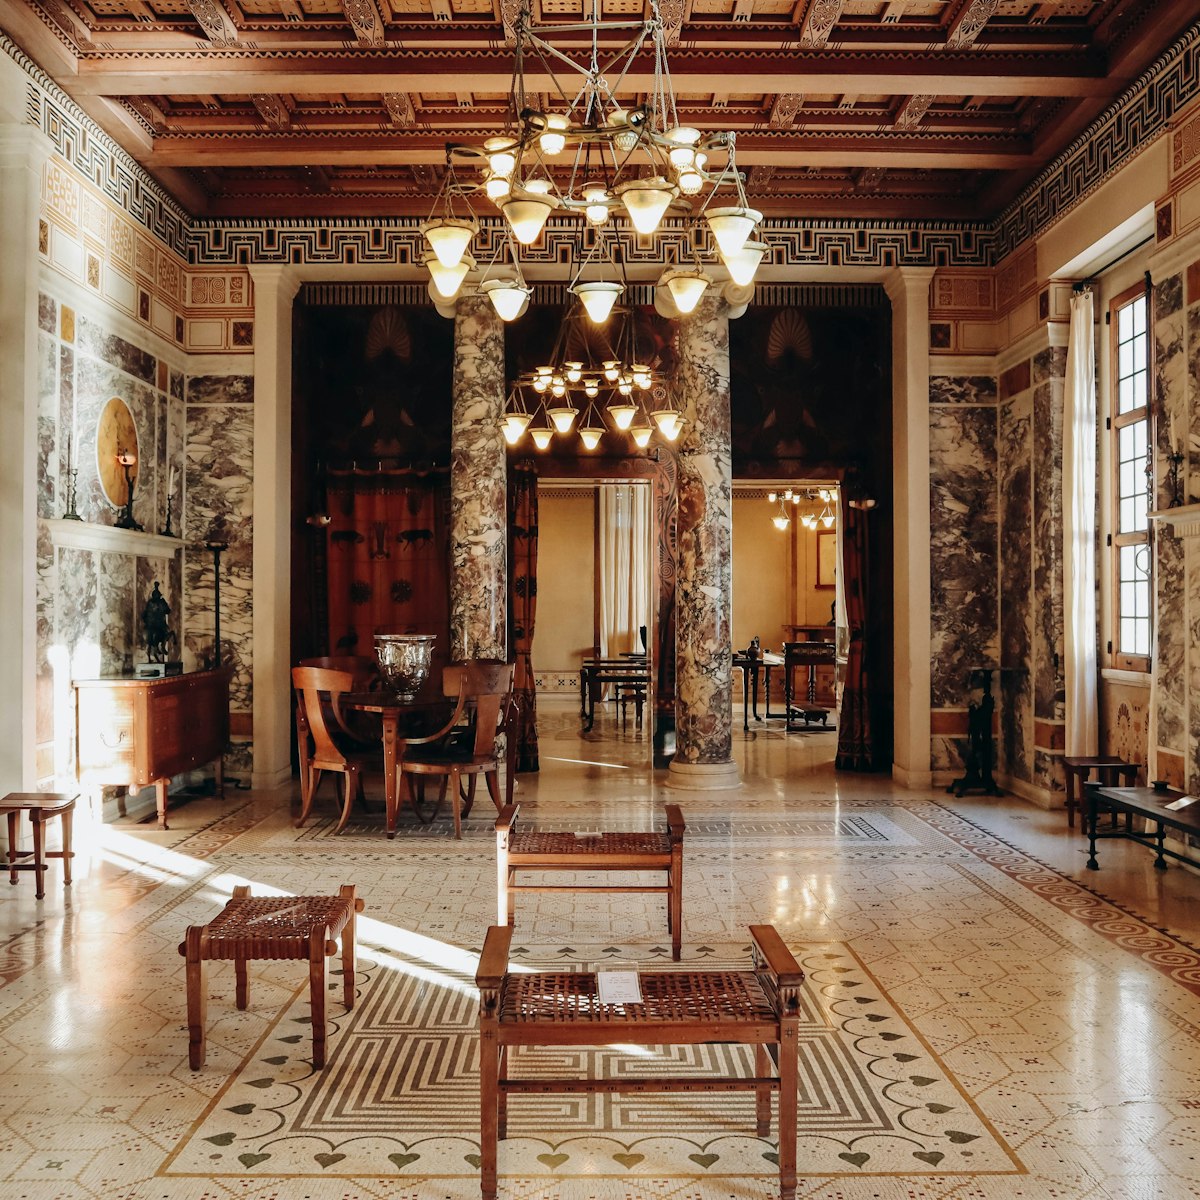 Luxurious interiors of the famous Greek-style villa Kerylos built at the beginning of the 20th century on the French Riviera.